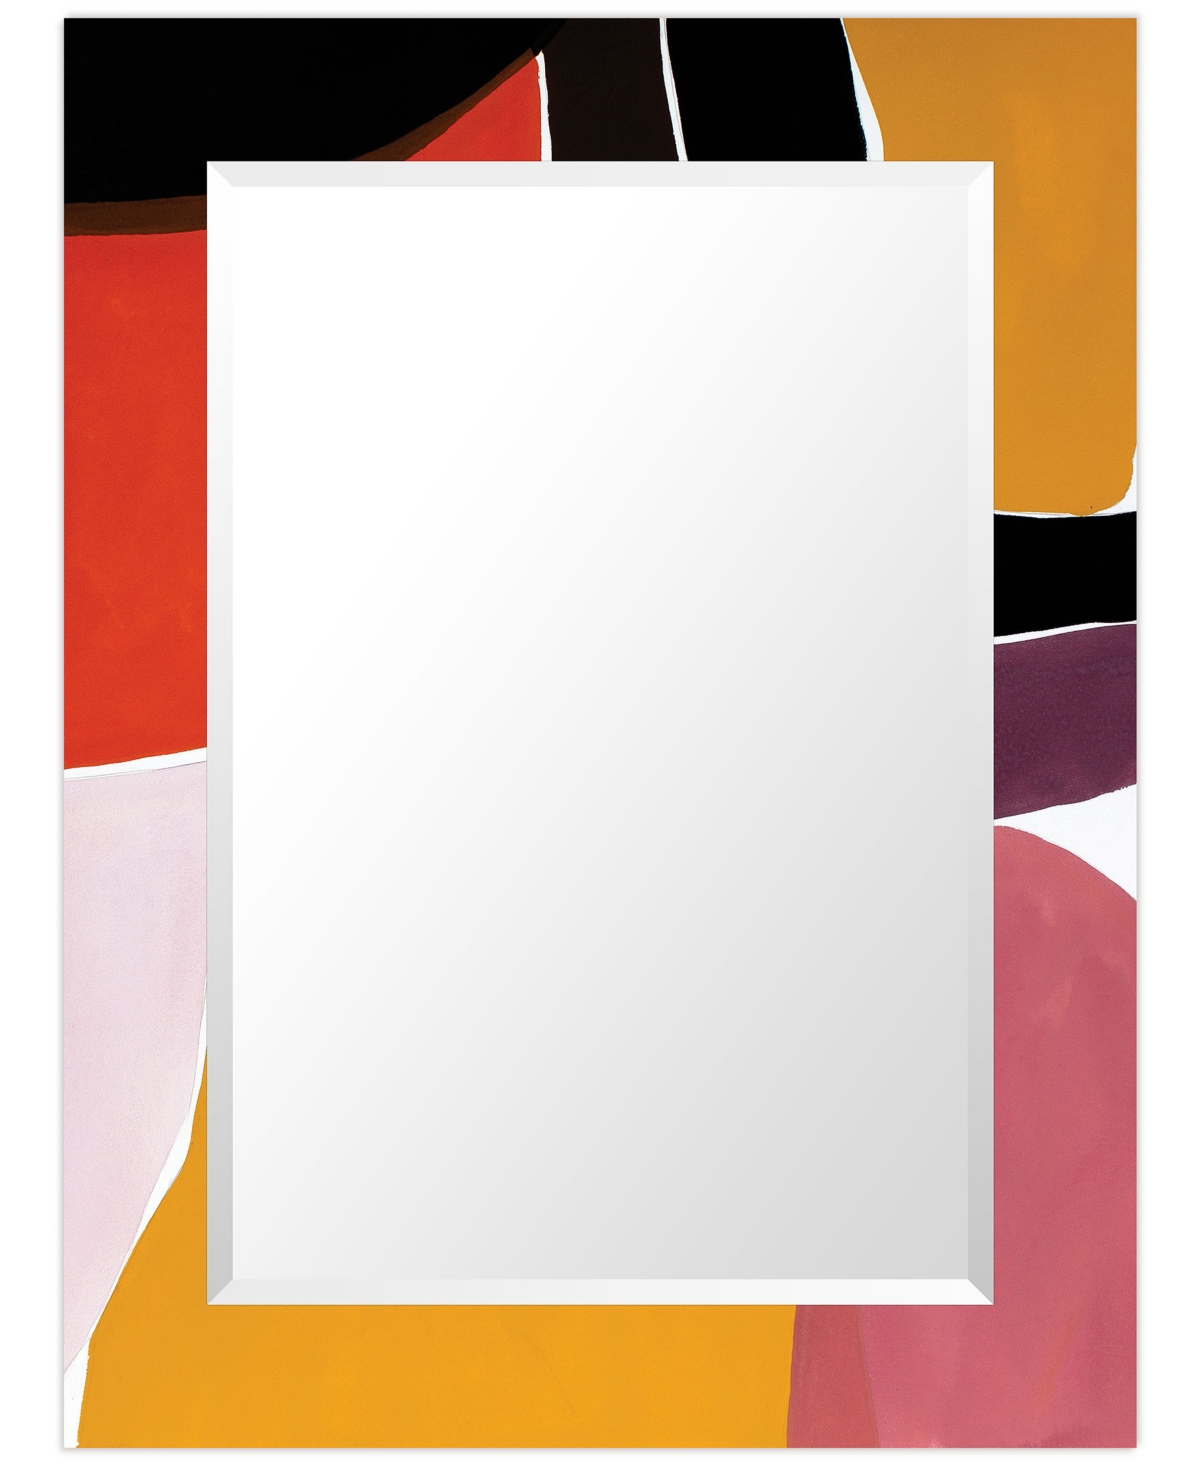 Empire Art Direct "melon-cholia I" Rectangular Beveled Mirror On Free Floating Printed Tempered Art Glass, 30" X 40" X In Multi-color